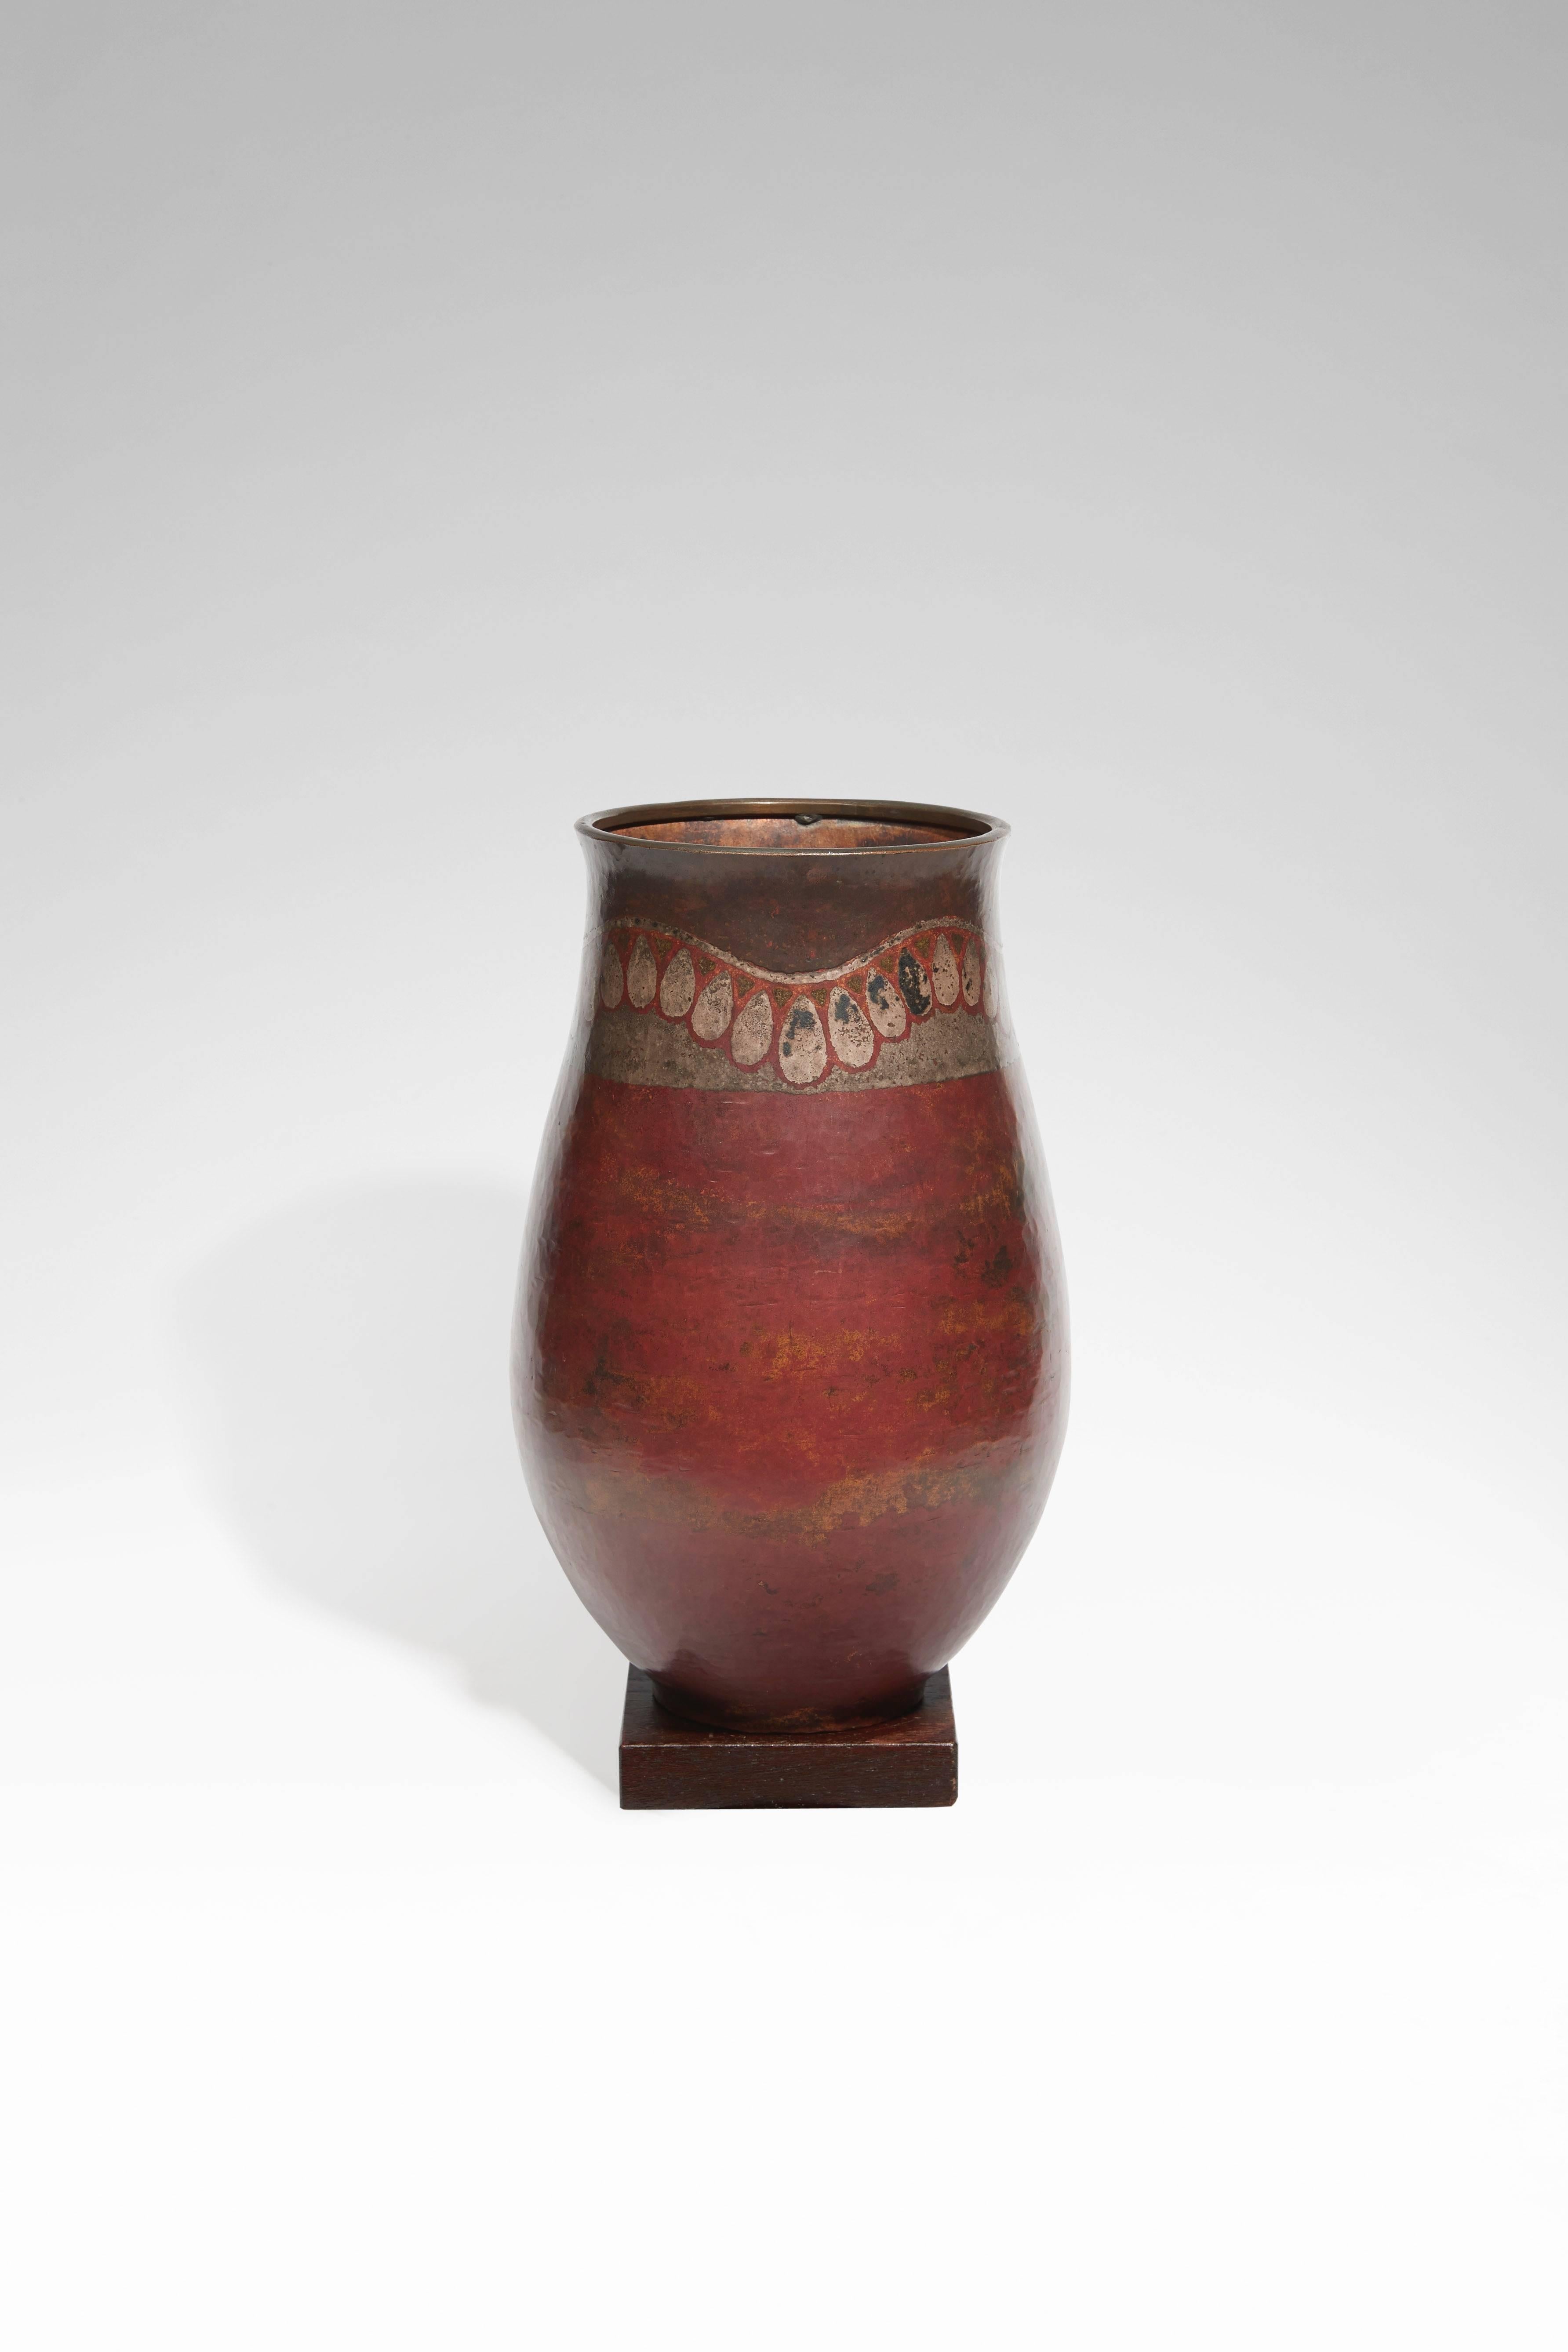 A Dinanderie ovoid-shaped copper vase called "Ondulation de pendeloques", with slightly splayed neck and squared base, the decor made up with fire patina and silver inlays on a base with fire patina, red on the neck and shaded grey on the